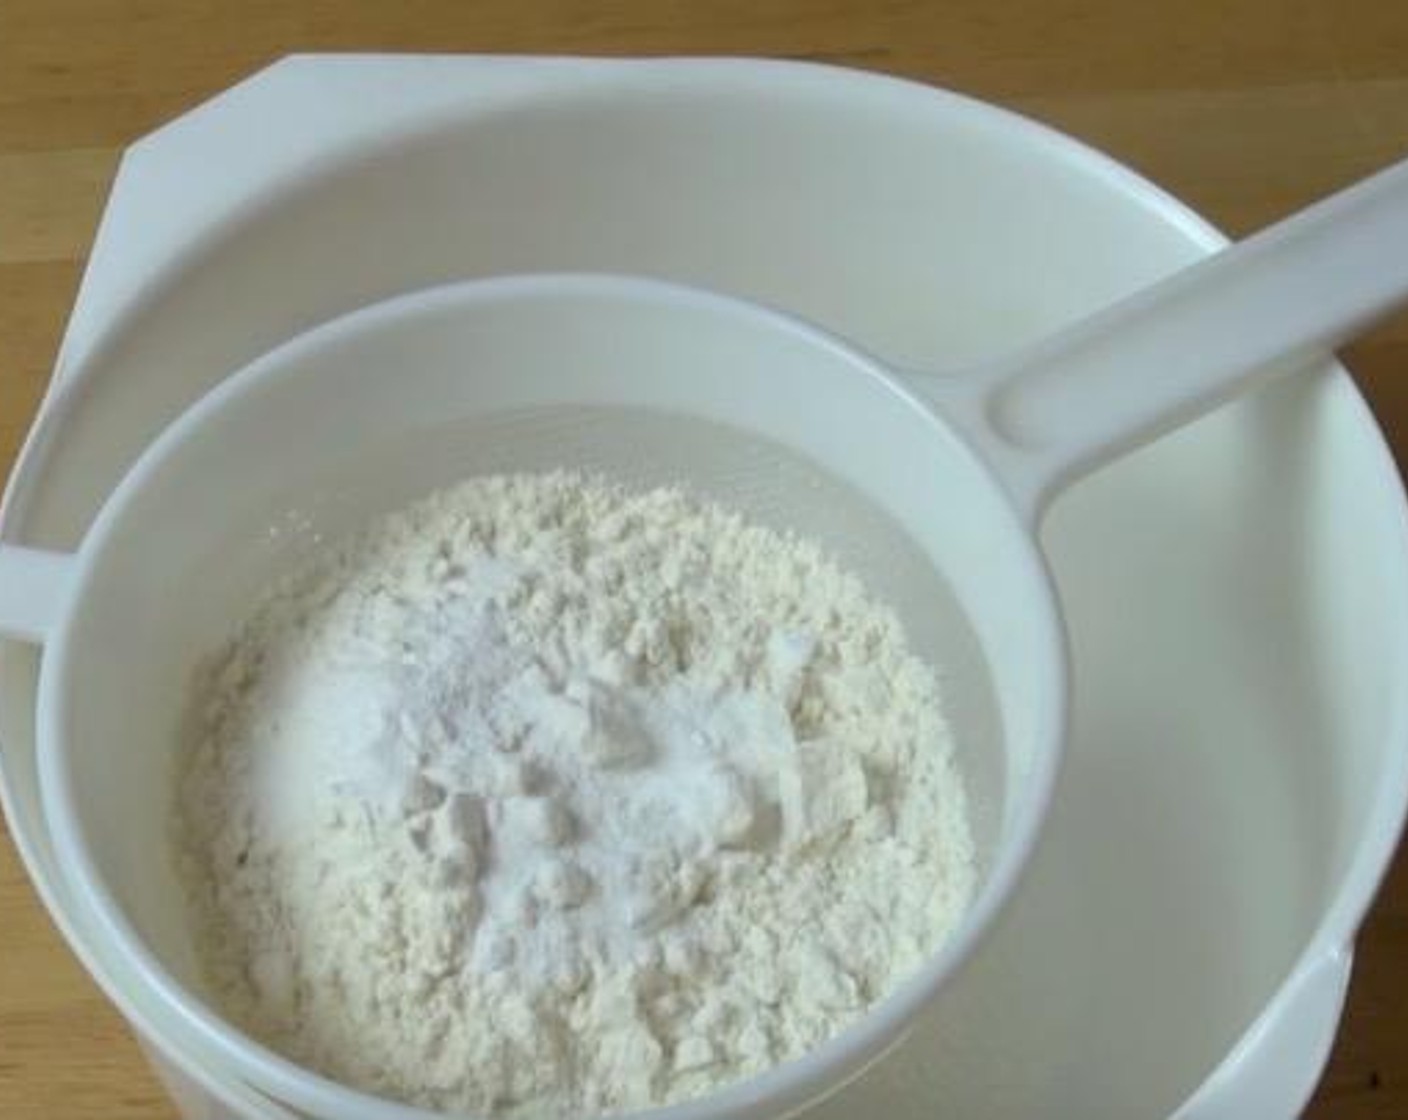 step 1 Add the All-Purpose Flour (1 cup) and Baking Powder (1 tsp) into a bowl.